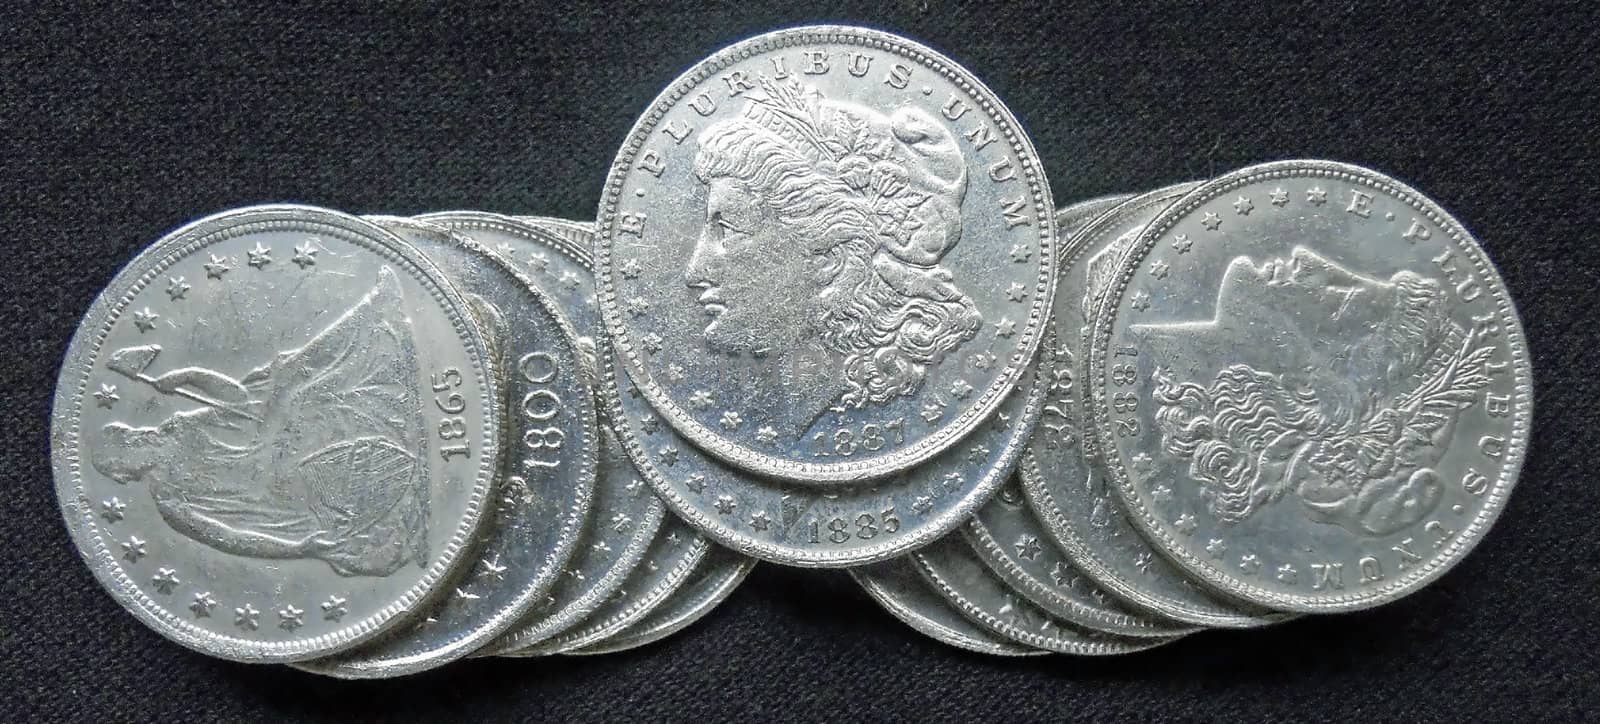 array of collectible silver coins by toady8